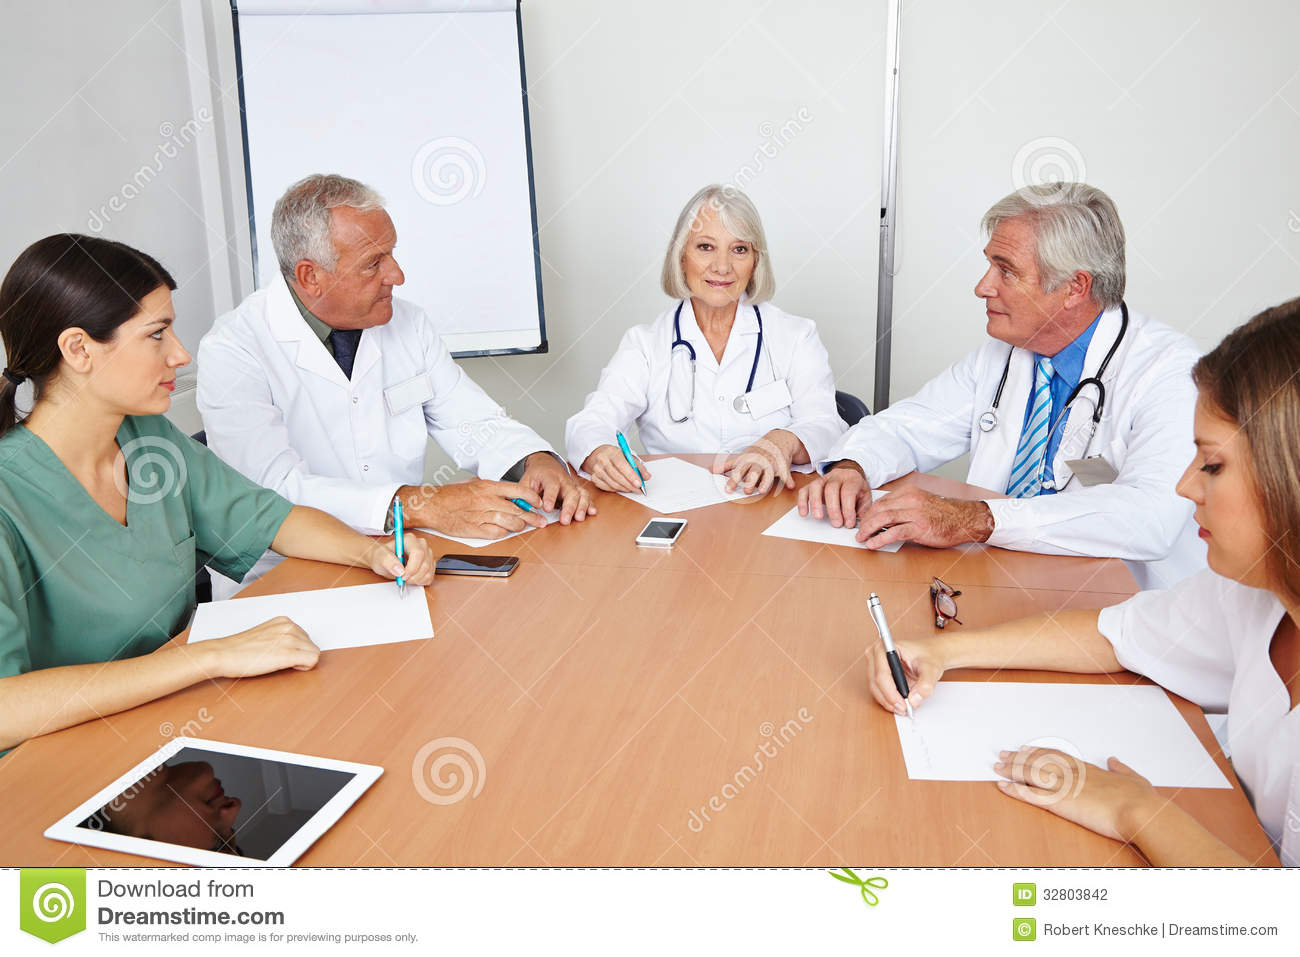 Team Meeting Of Doctors In Hospital Stock Photography   Image